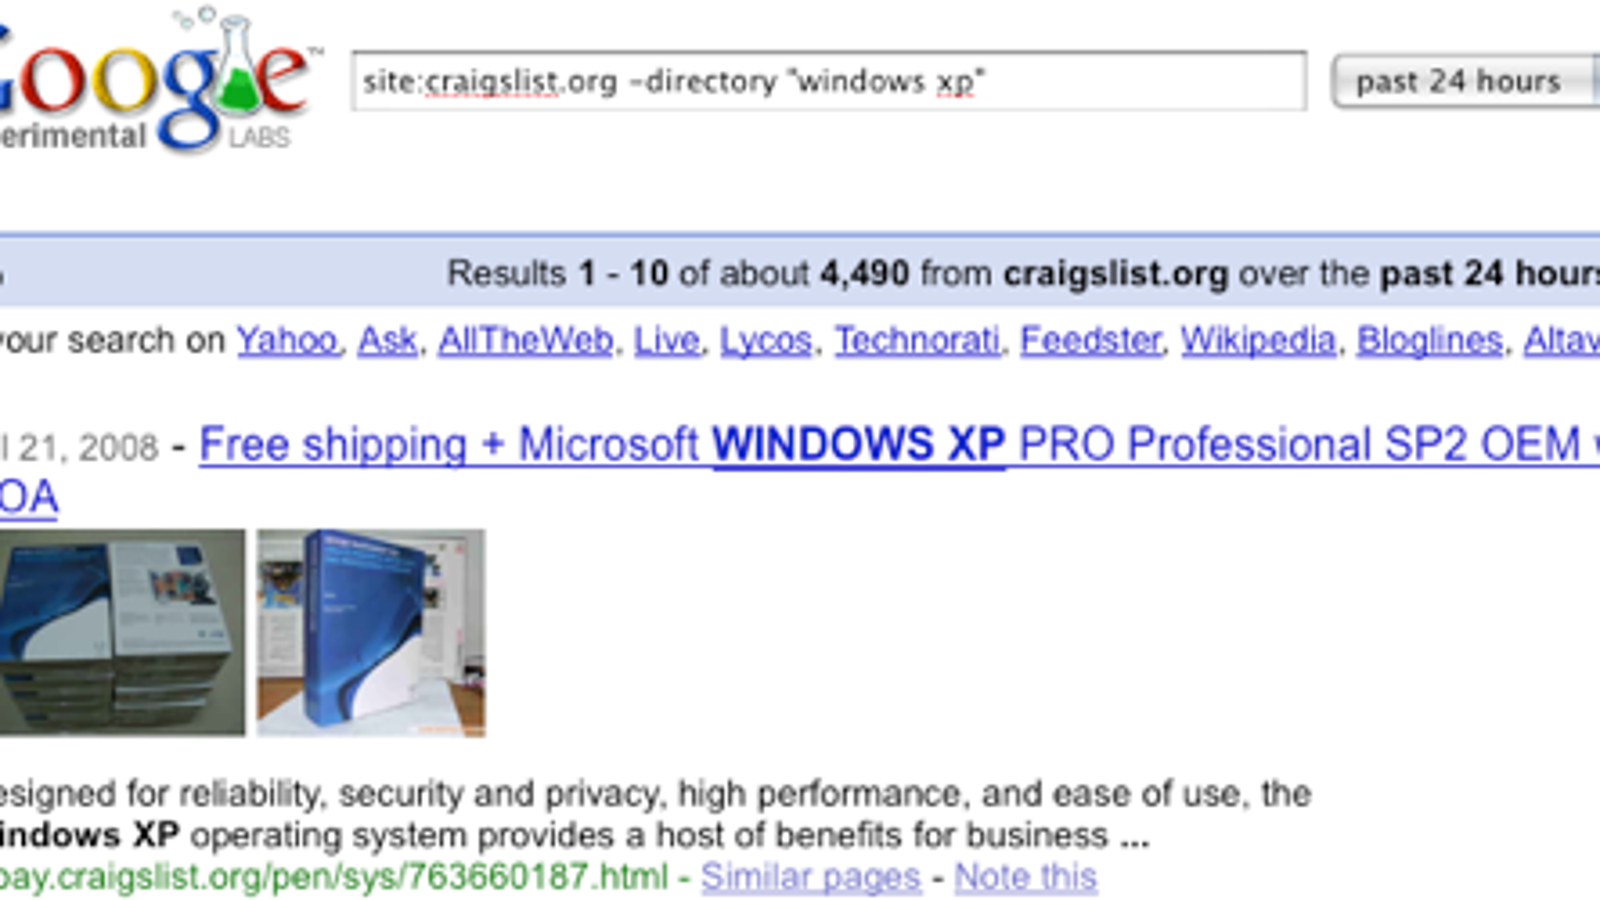 Search All Craigslist Sites at Once with Google